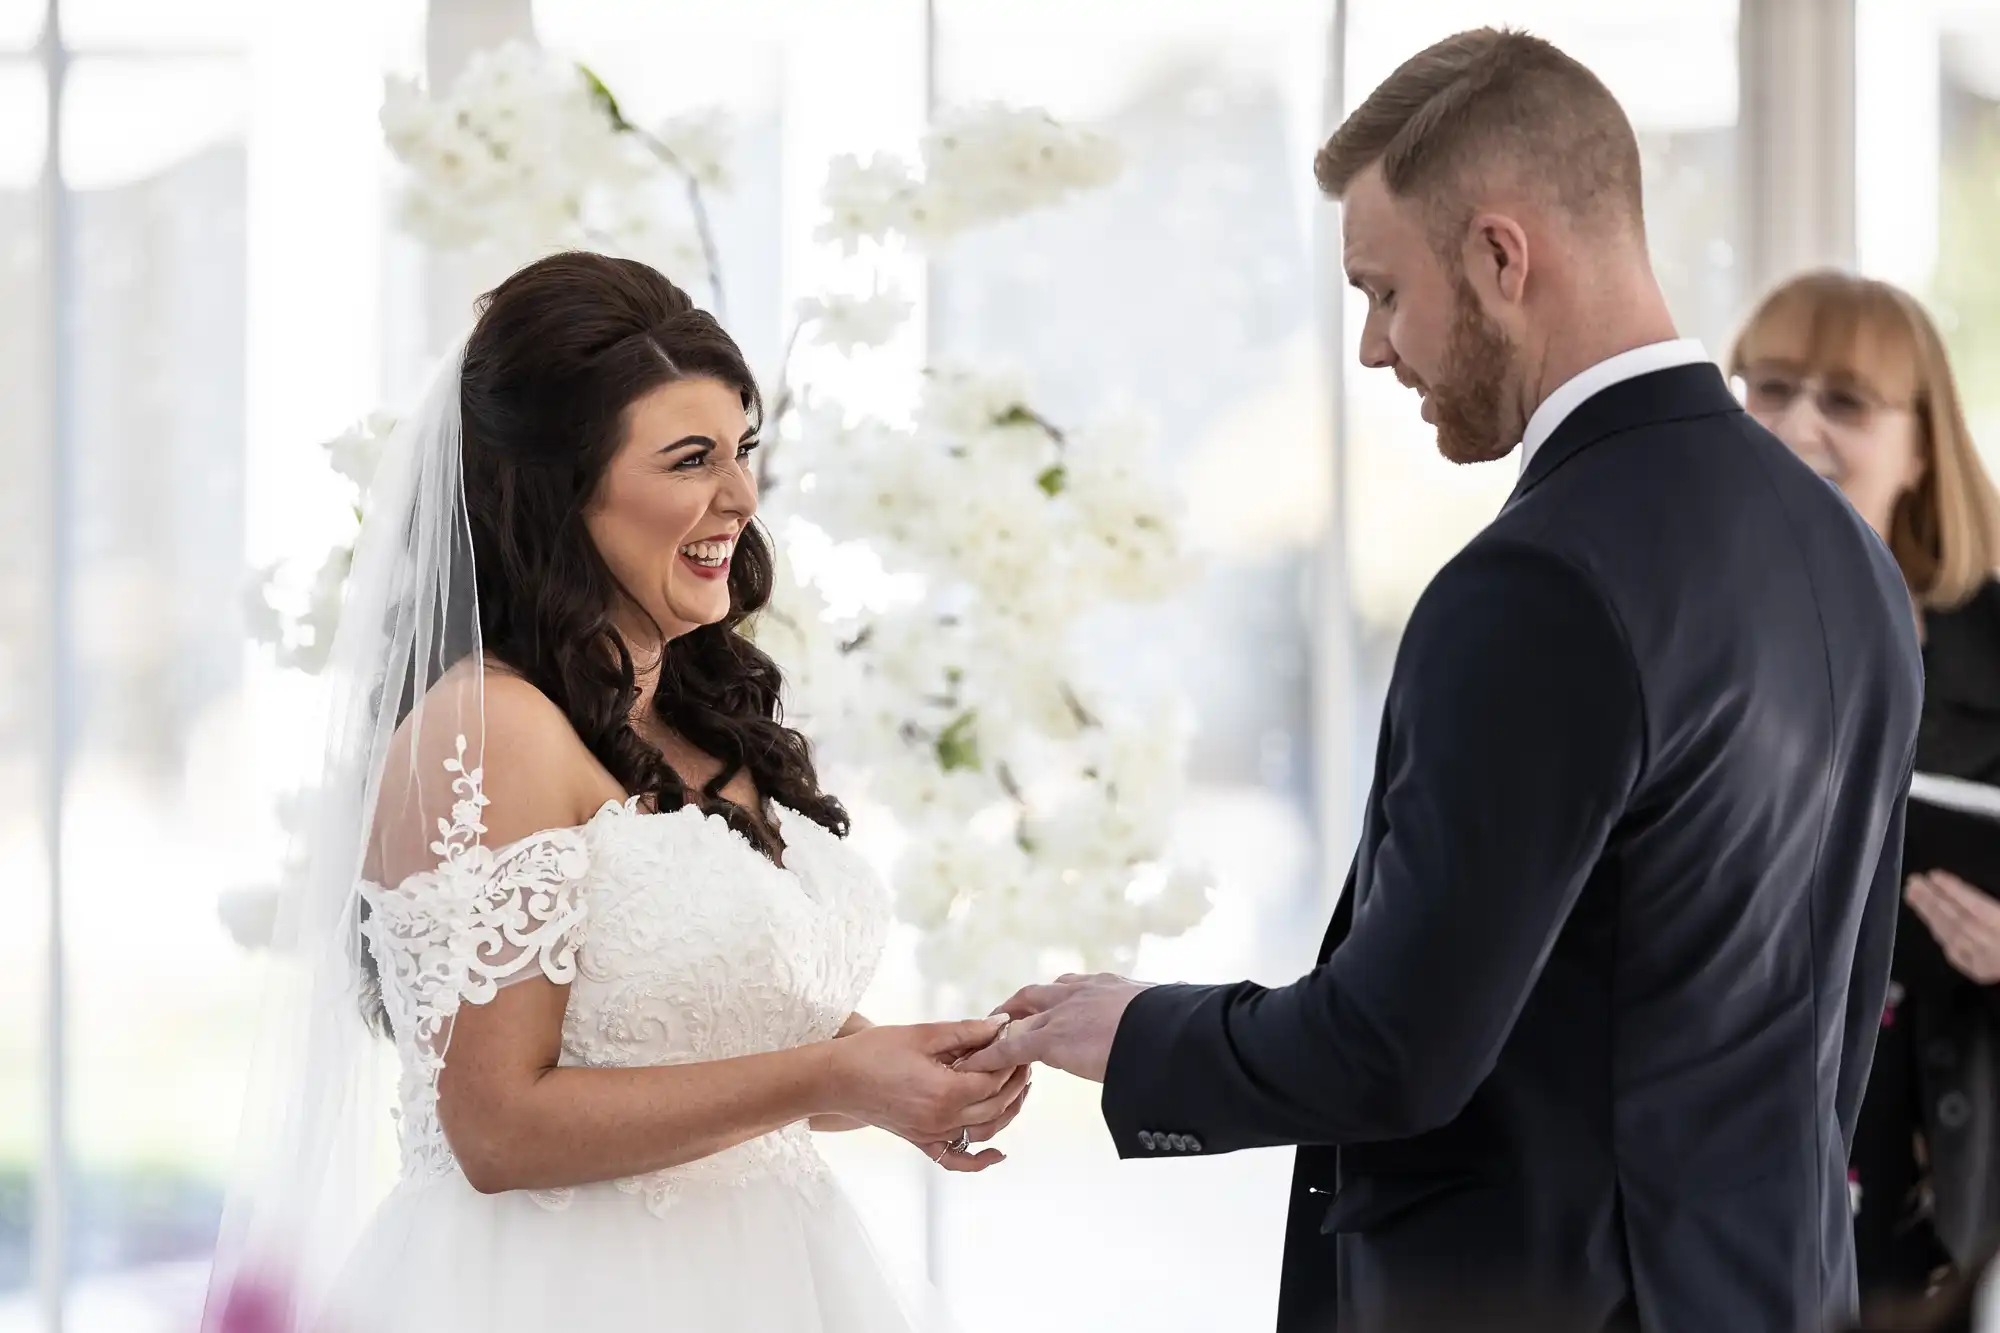 A bride and groom stand facing each other during a wedding ceremony, with the bride smiling as the groom places a ring on her finger. An officiant stands in the background holding a book.